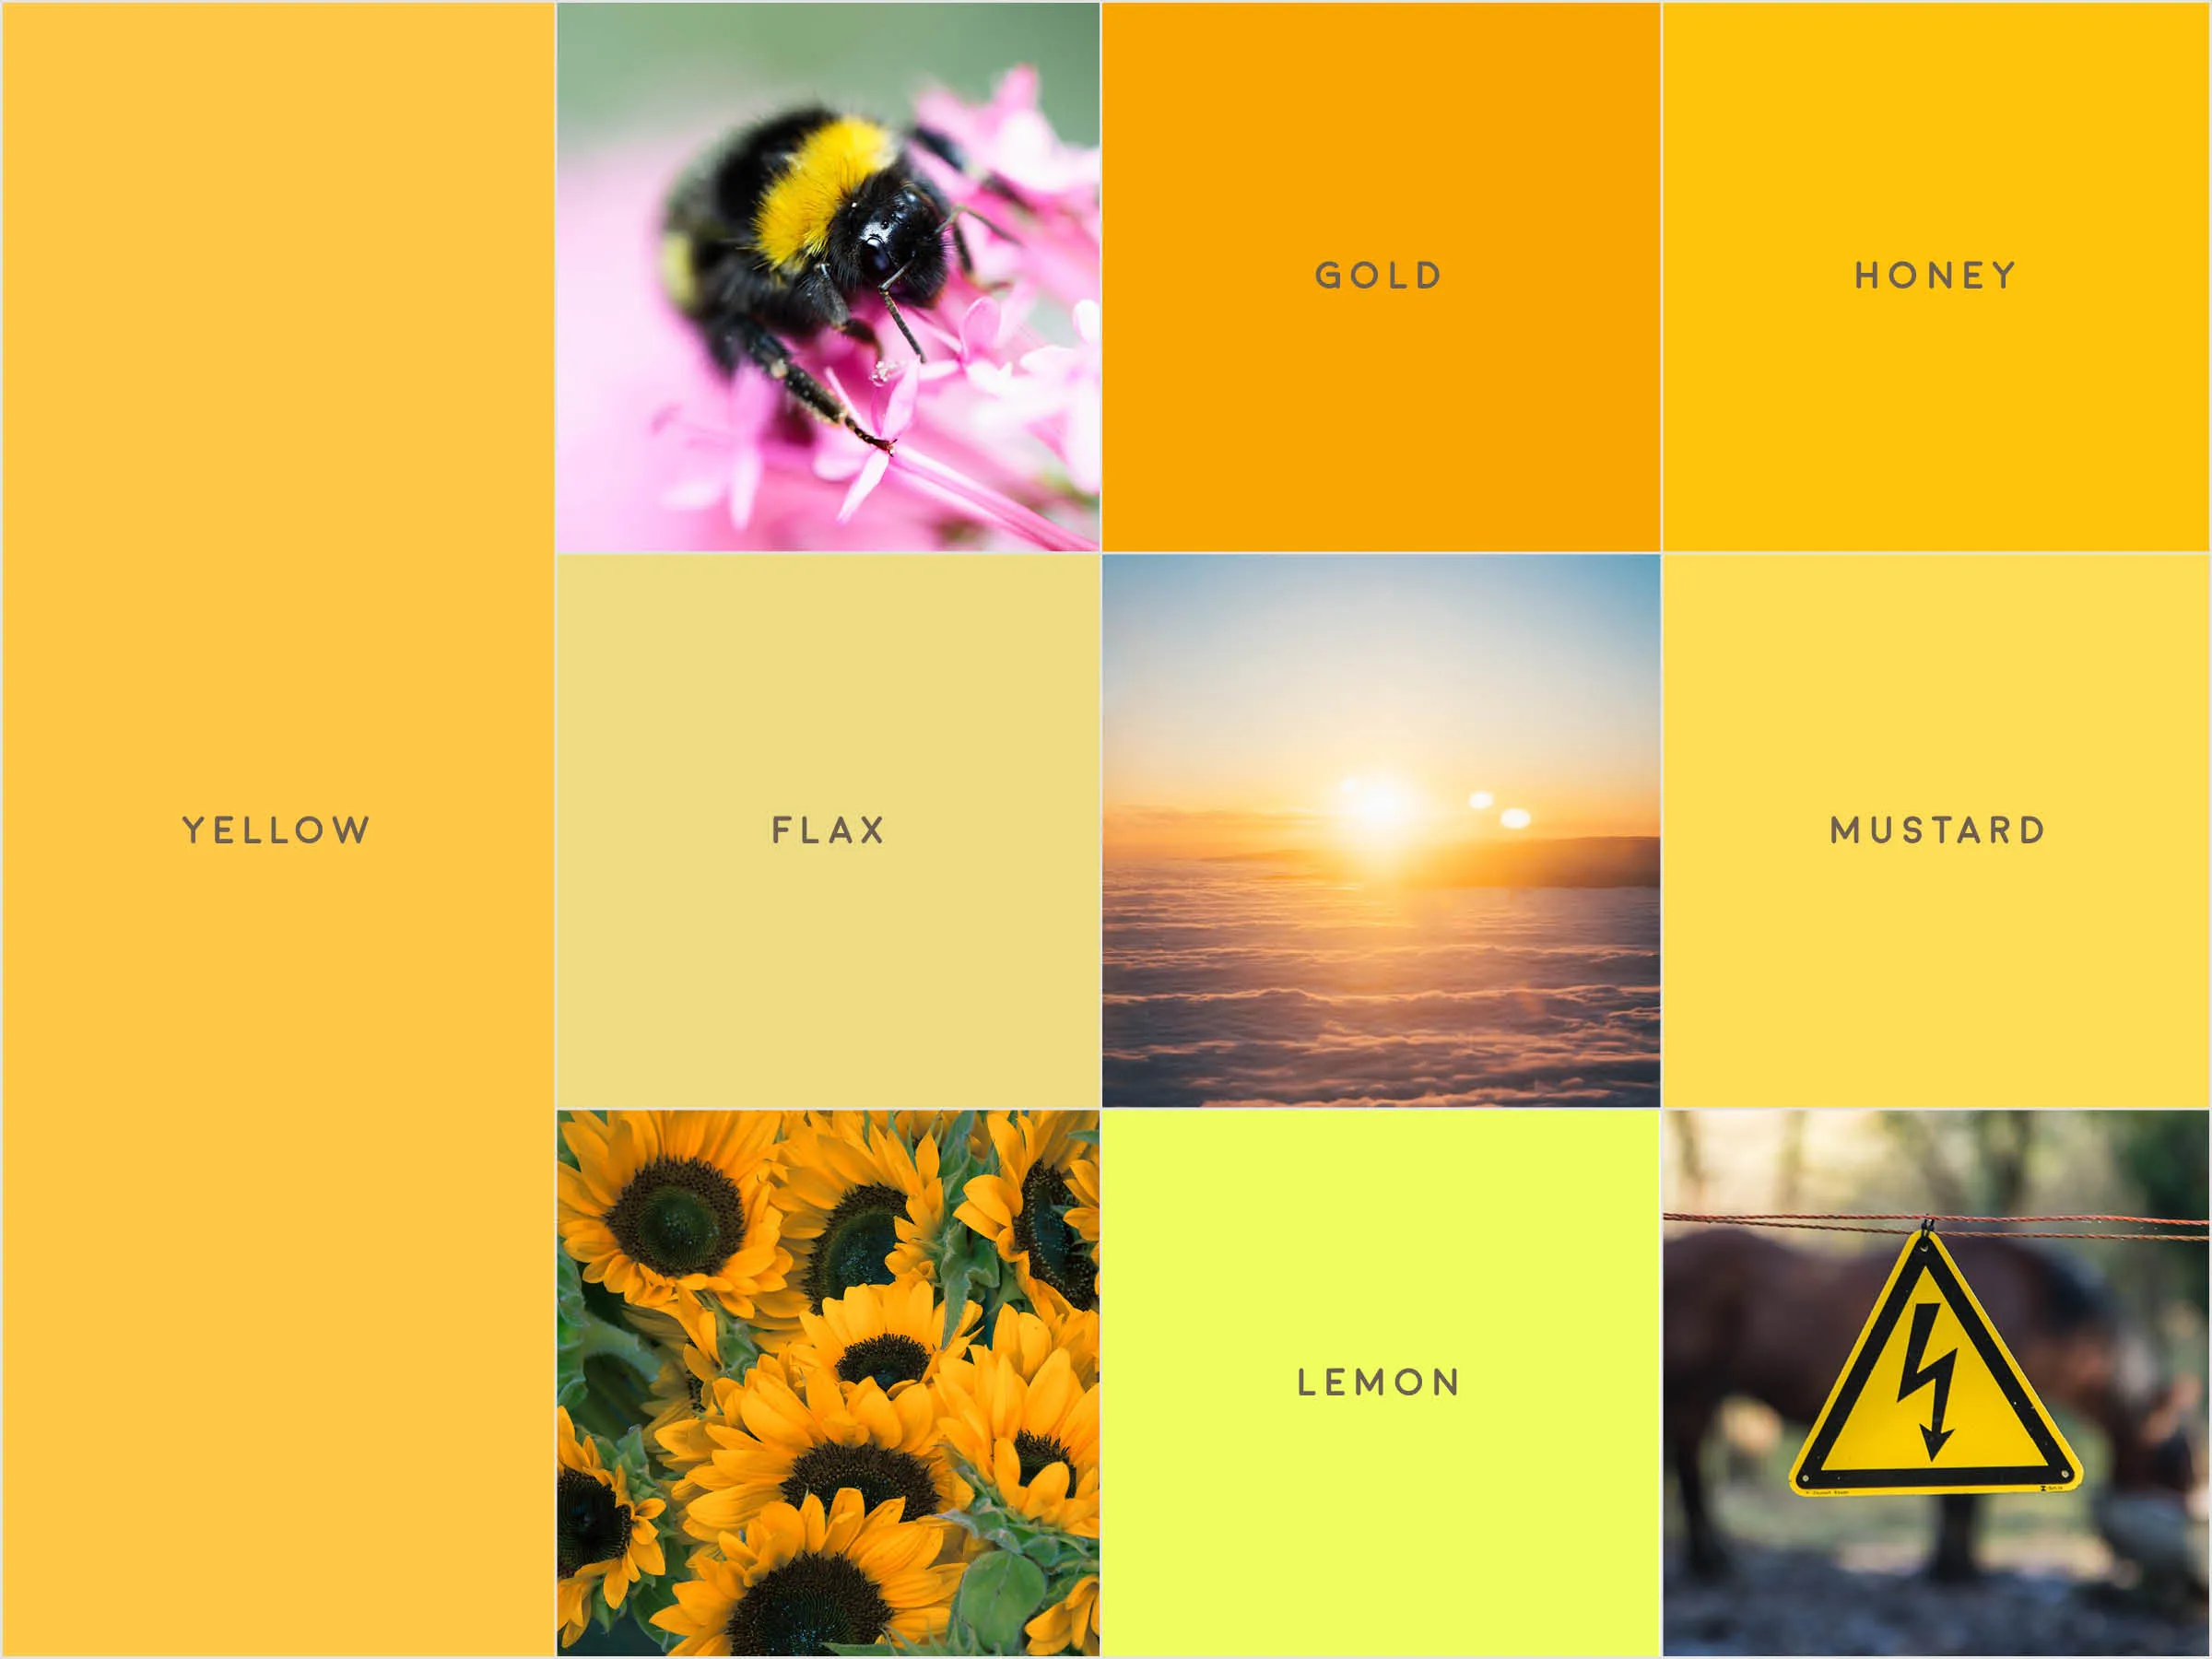 A gridded image with various tones of yellow, and small photographs of a bee, sunflowers, a hazard sign, and a sunset